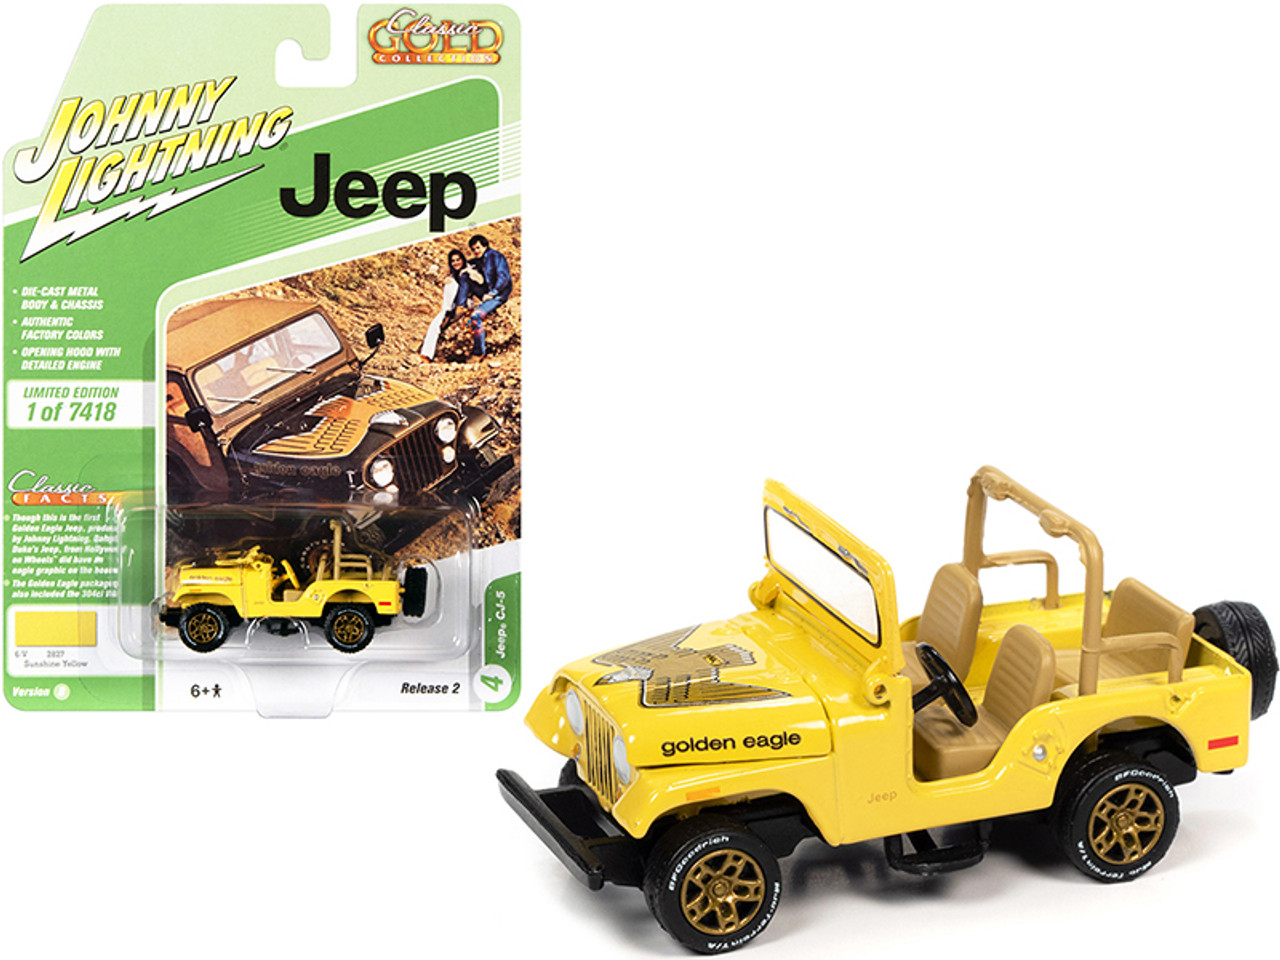 Jeep CJ-5 Sunshine Yellow with Golden Eagle Graphics "Classic Gold Collection" Limited Edition to 7418 pieces Worldwide 1/64 Diecast Model Car by Johnny Lightning